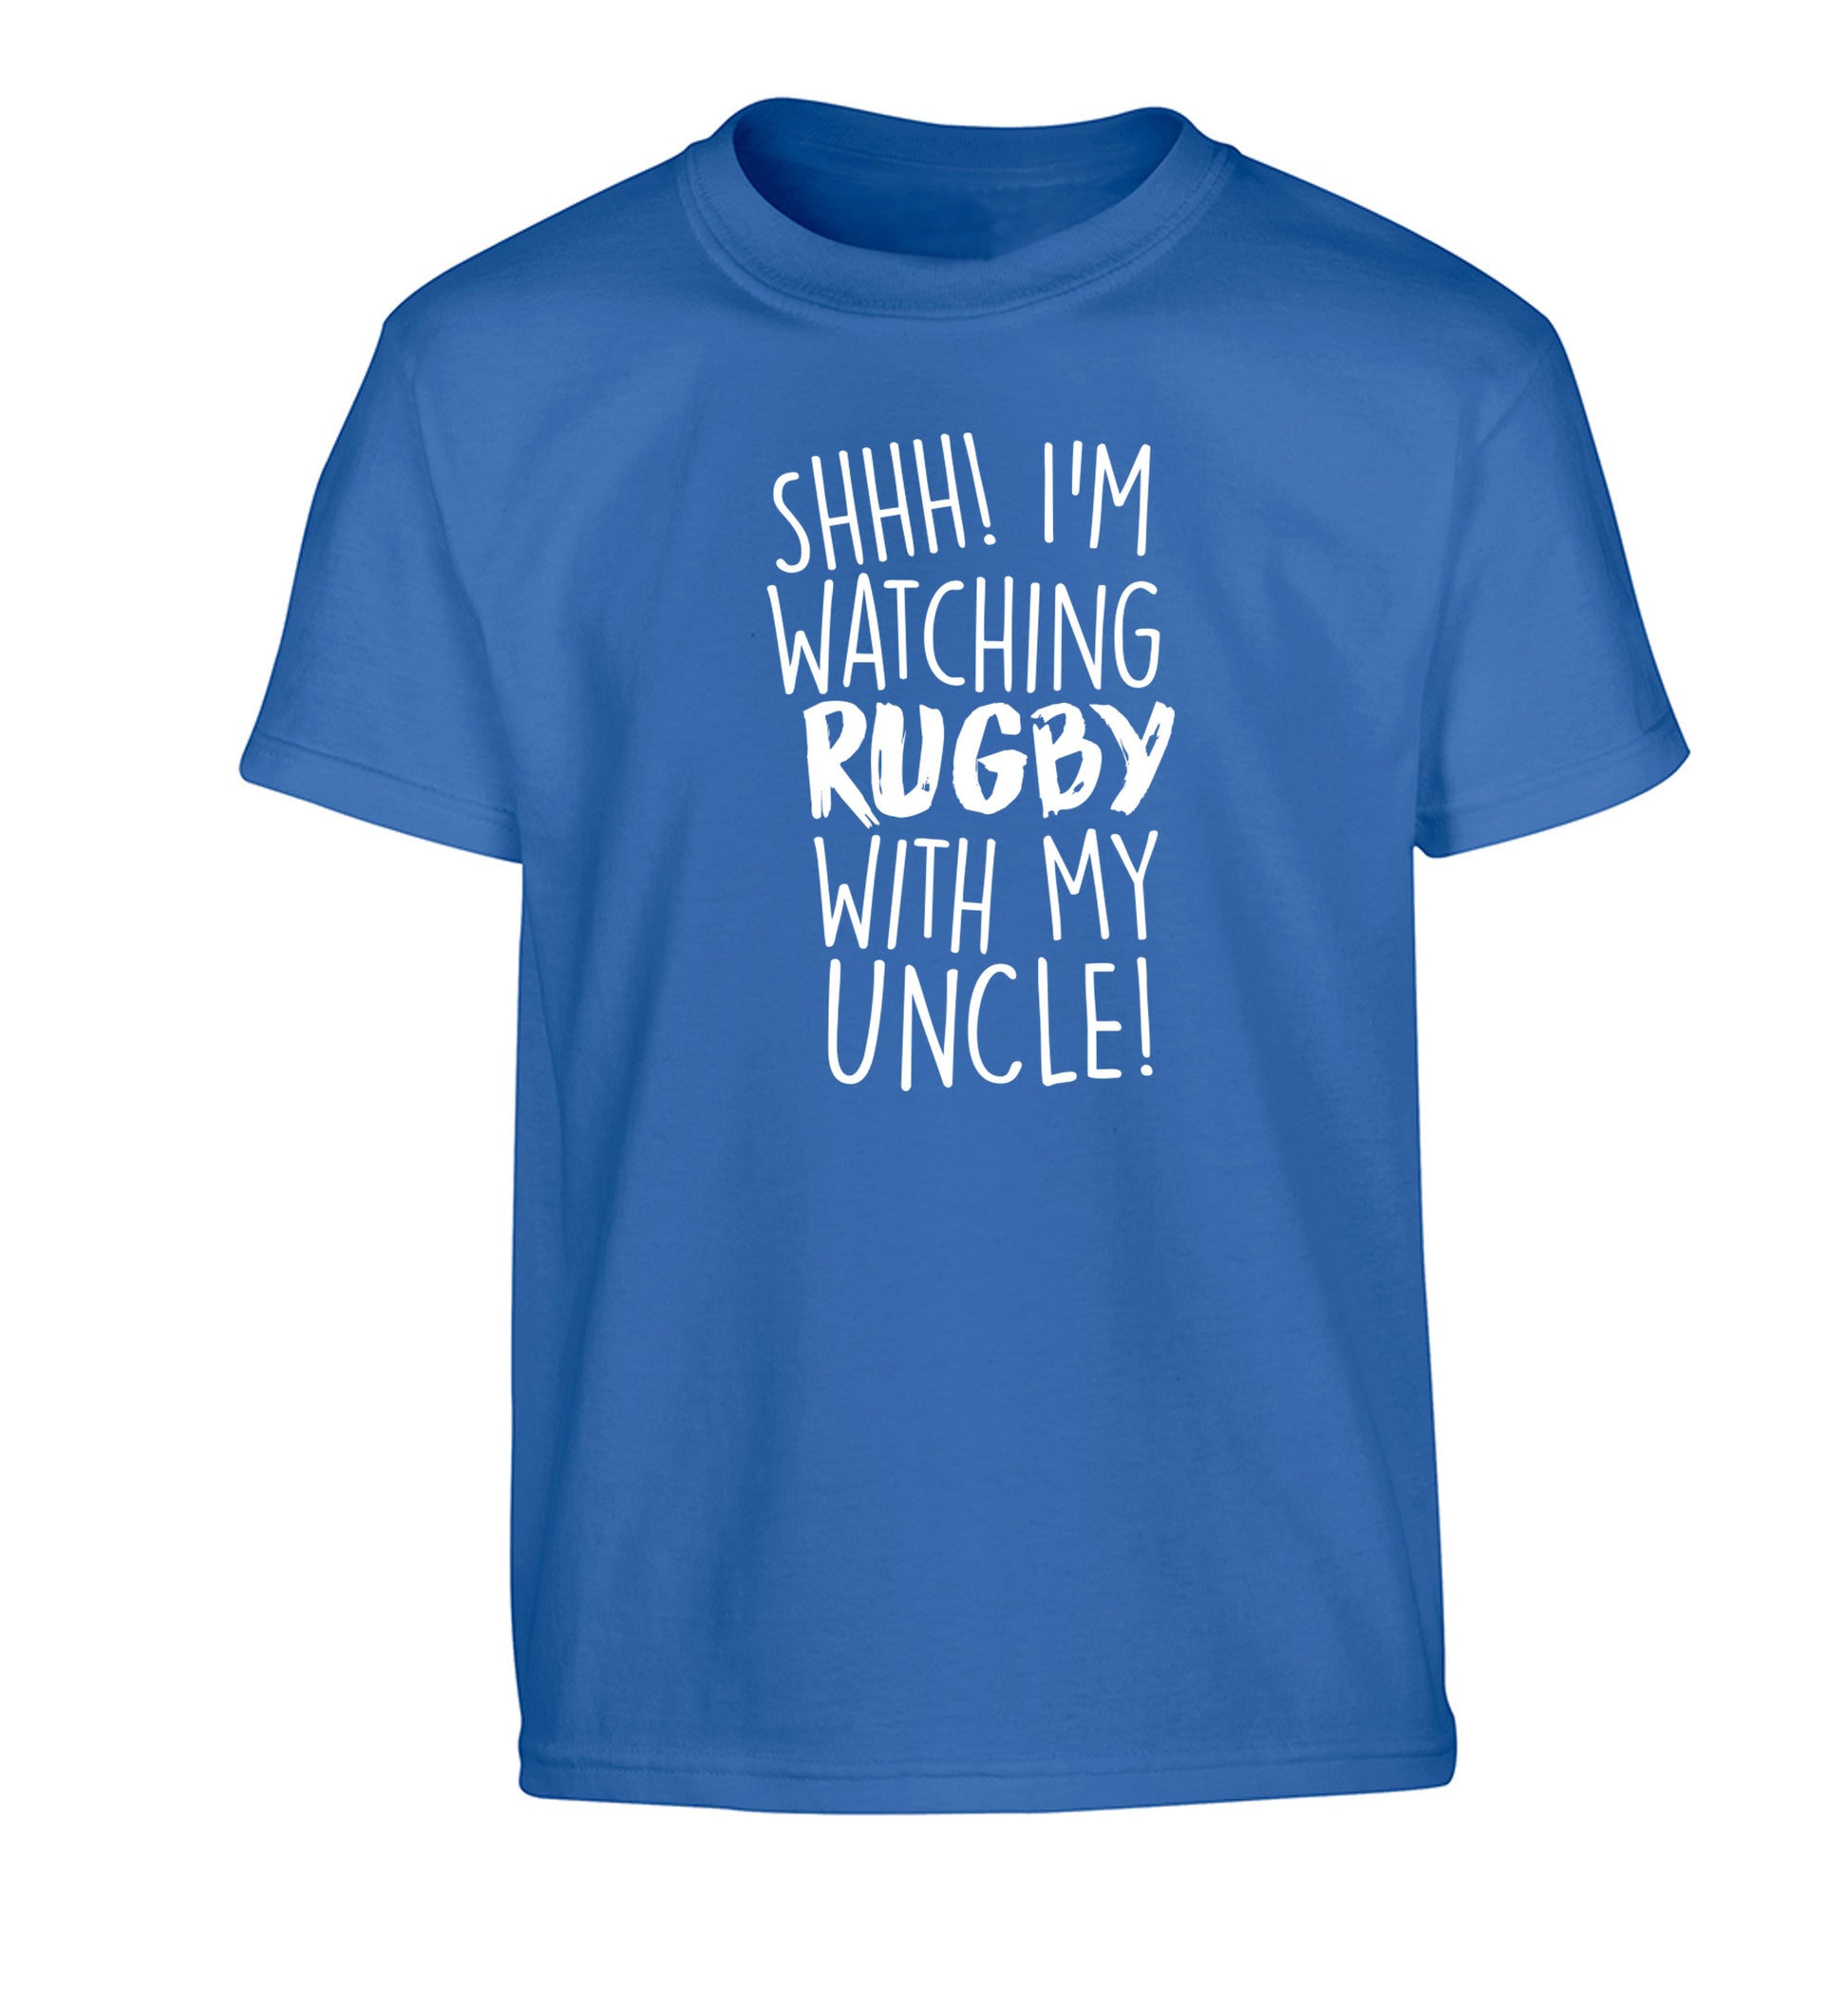 Shh.. I'm watching rugby with my uncle Children's blue Tshirt 12-13 Years